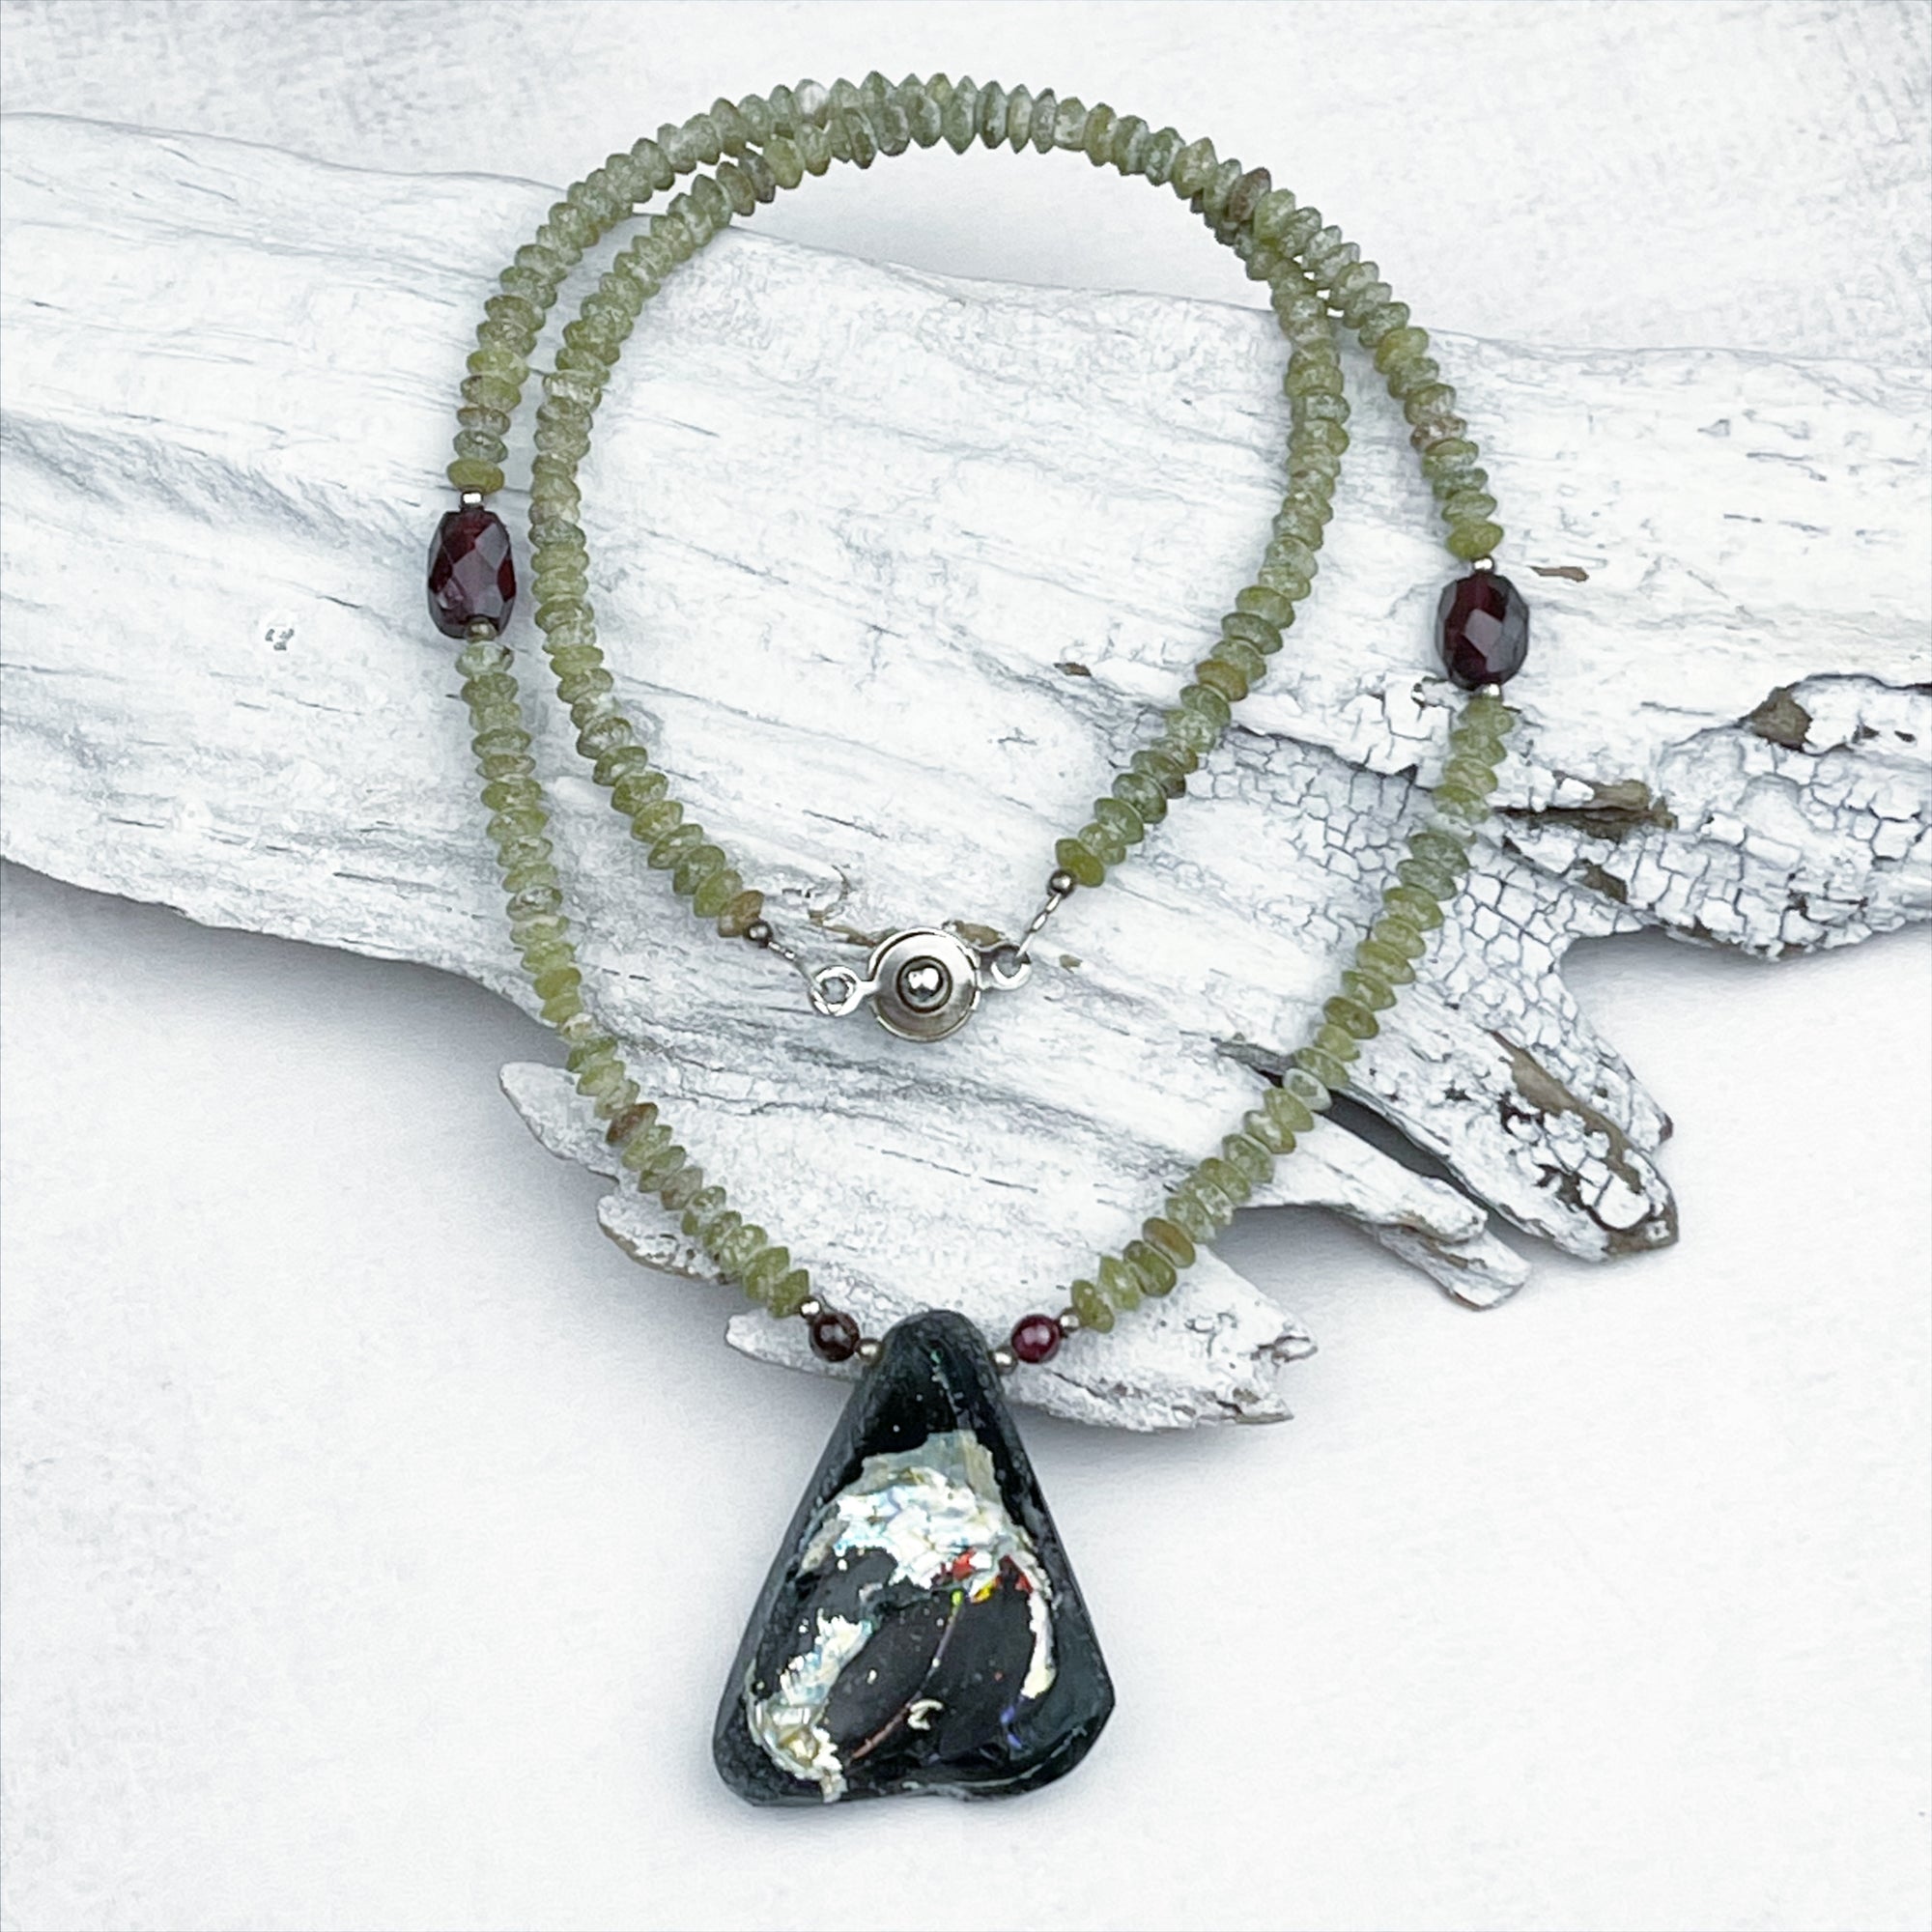 Ancient Roman Glass Necklace with Green Serpenite Beads in Sterling Silver